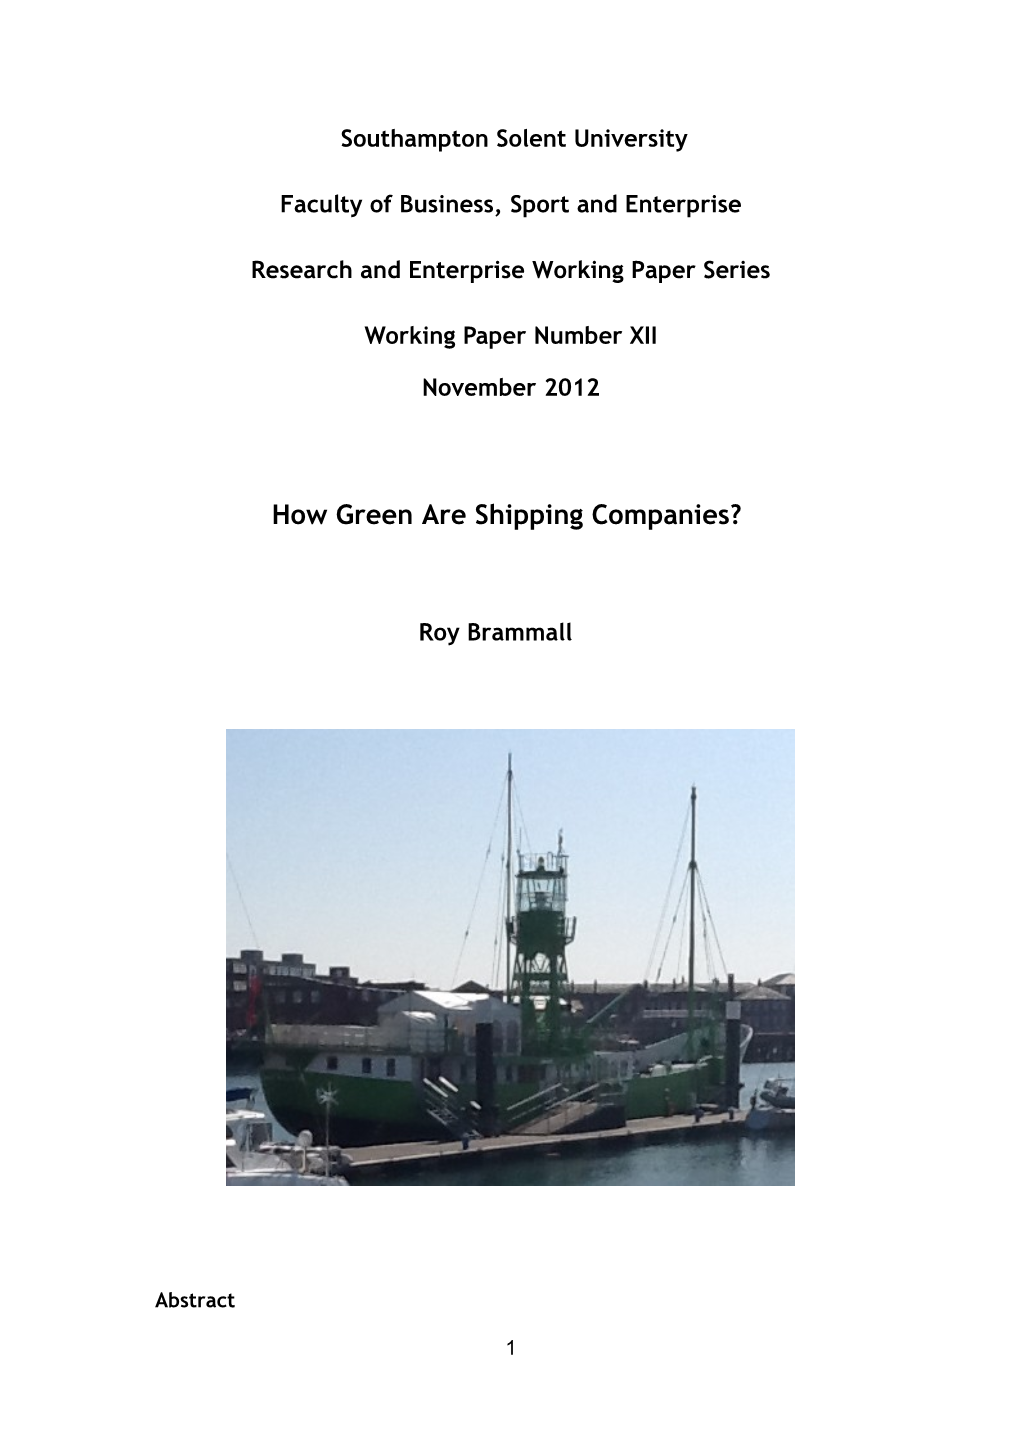 How Green Are Shipping Companies